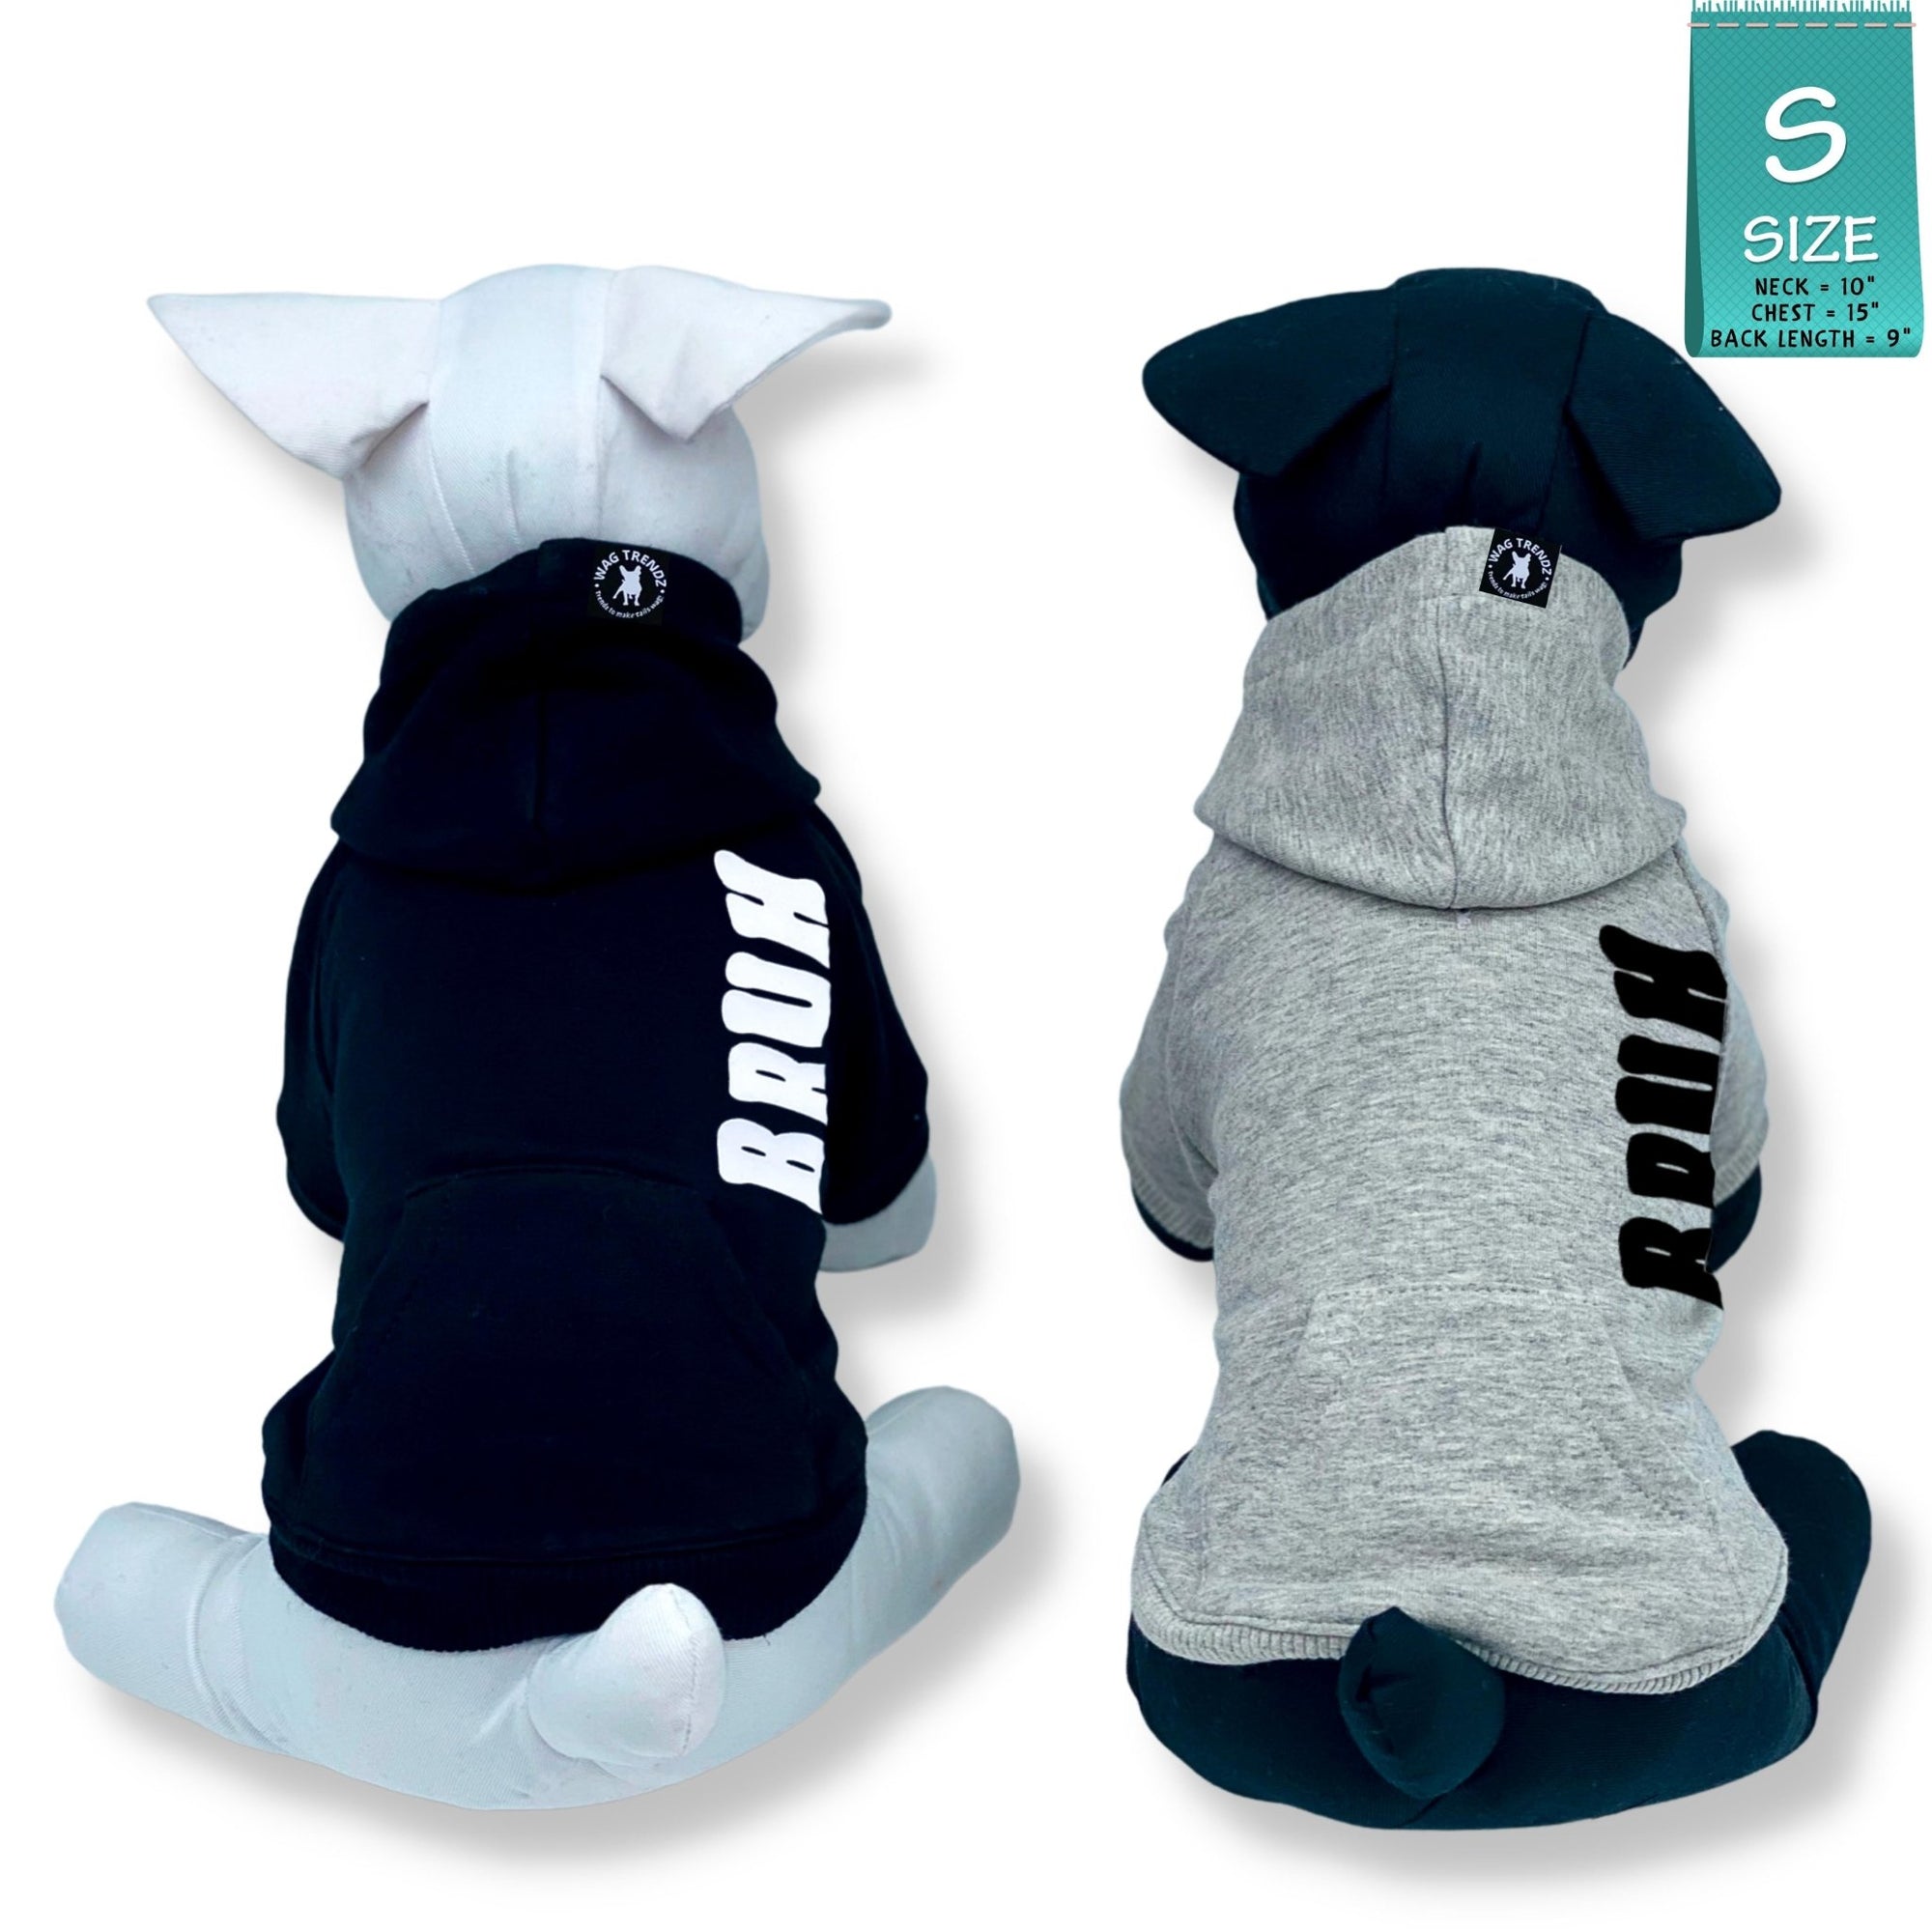 Dog Hoodie - Hoodies For Dogs - Stuffed black and white dogs wearing &quot;BRUH&quot; dog hoodie in black with white lettering and gray with black lettering - back view - against solid white background - Wag Trendz